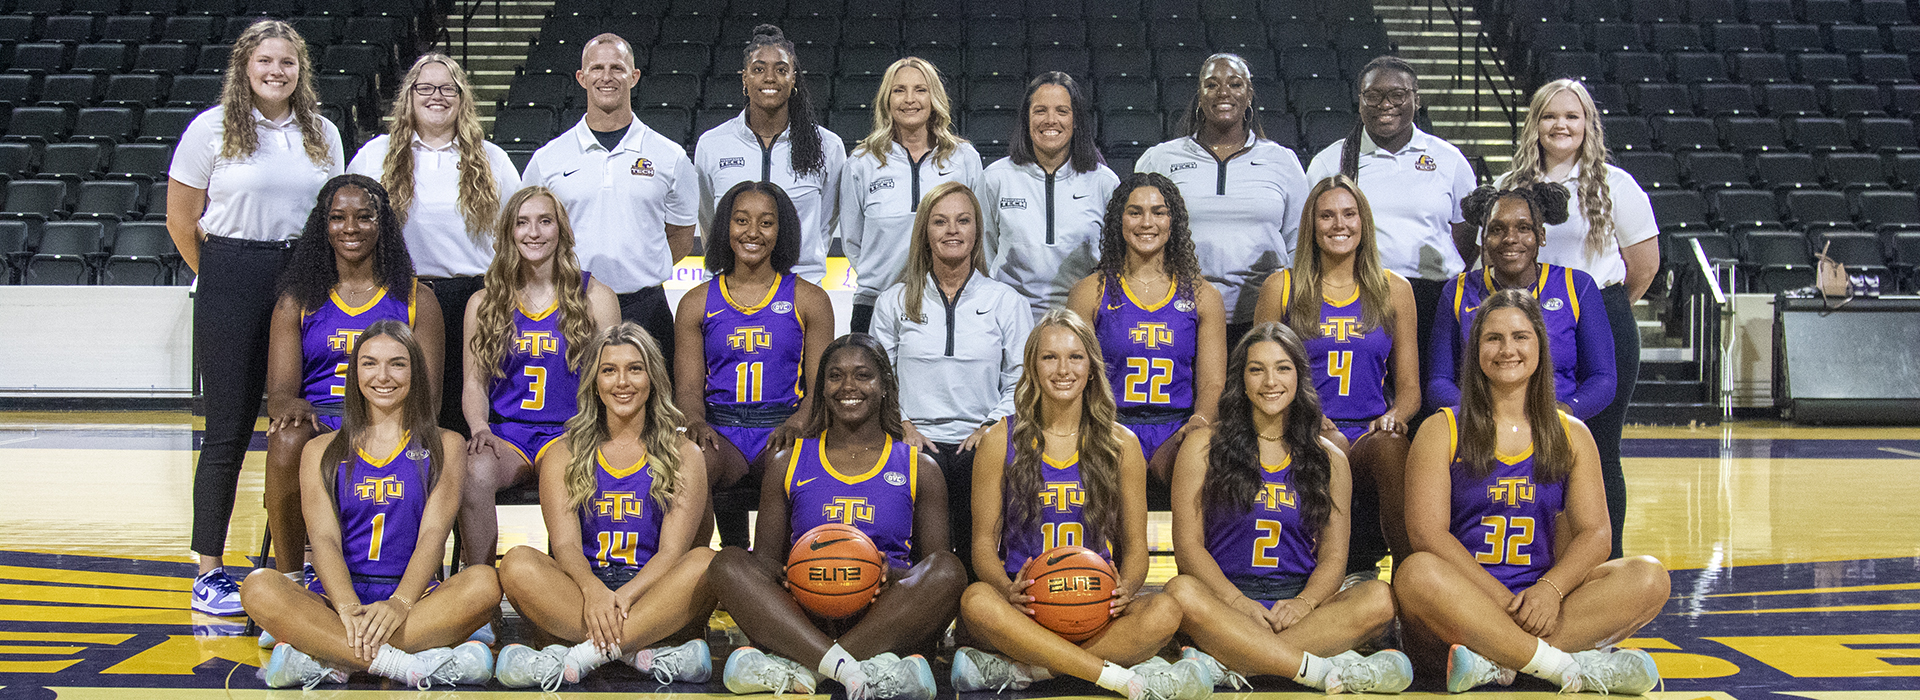 Tech women's basketball heading to Portugal in August, fan travel package available